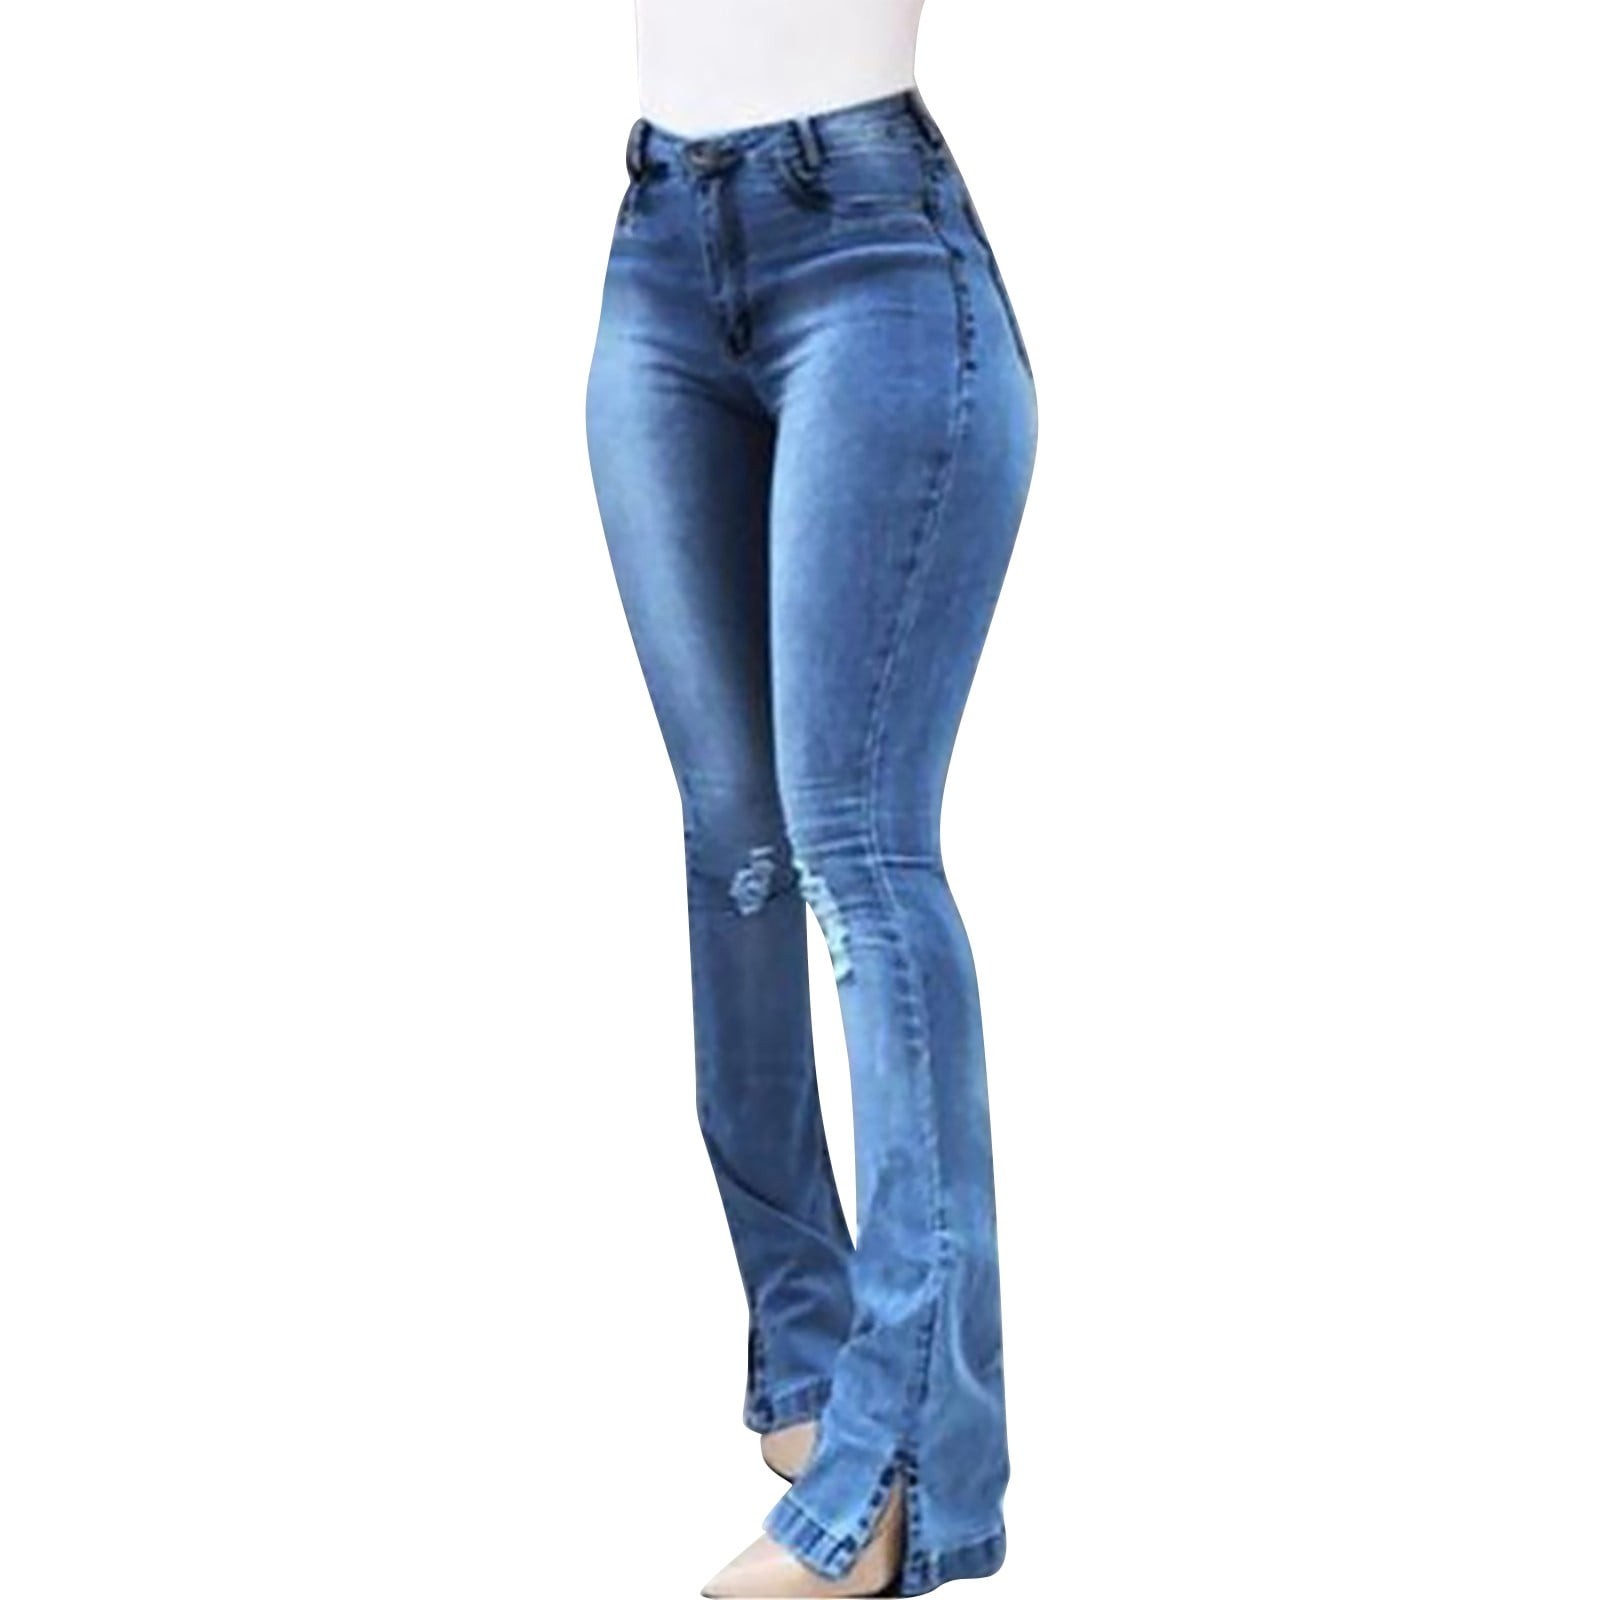 gvdentm Jeans For Women Womens High Waisted Bell Bottom Jeans Denim High  Rise Flare Jean Pants with Wide Leg and Belt